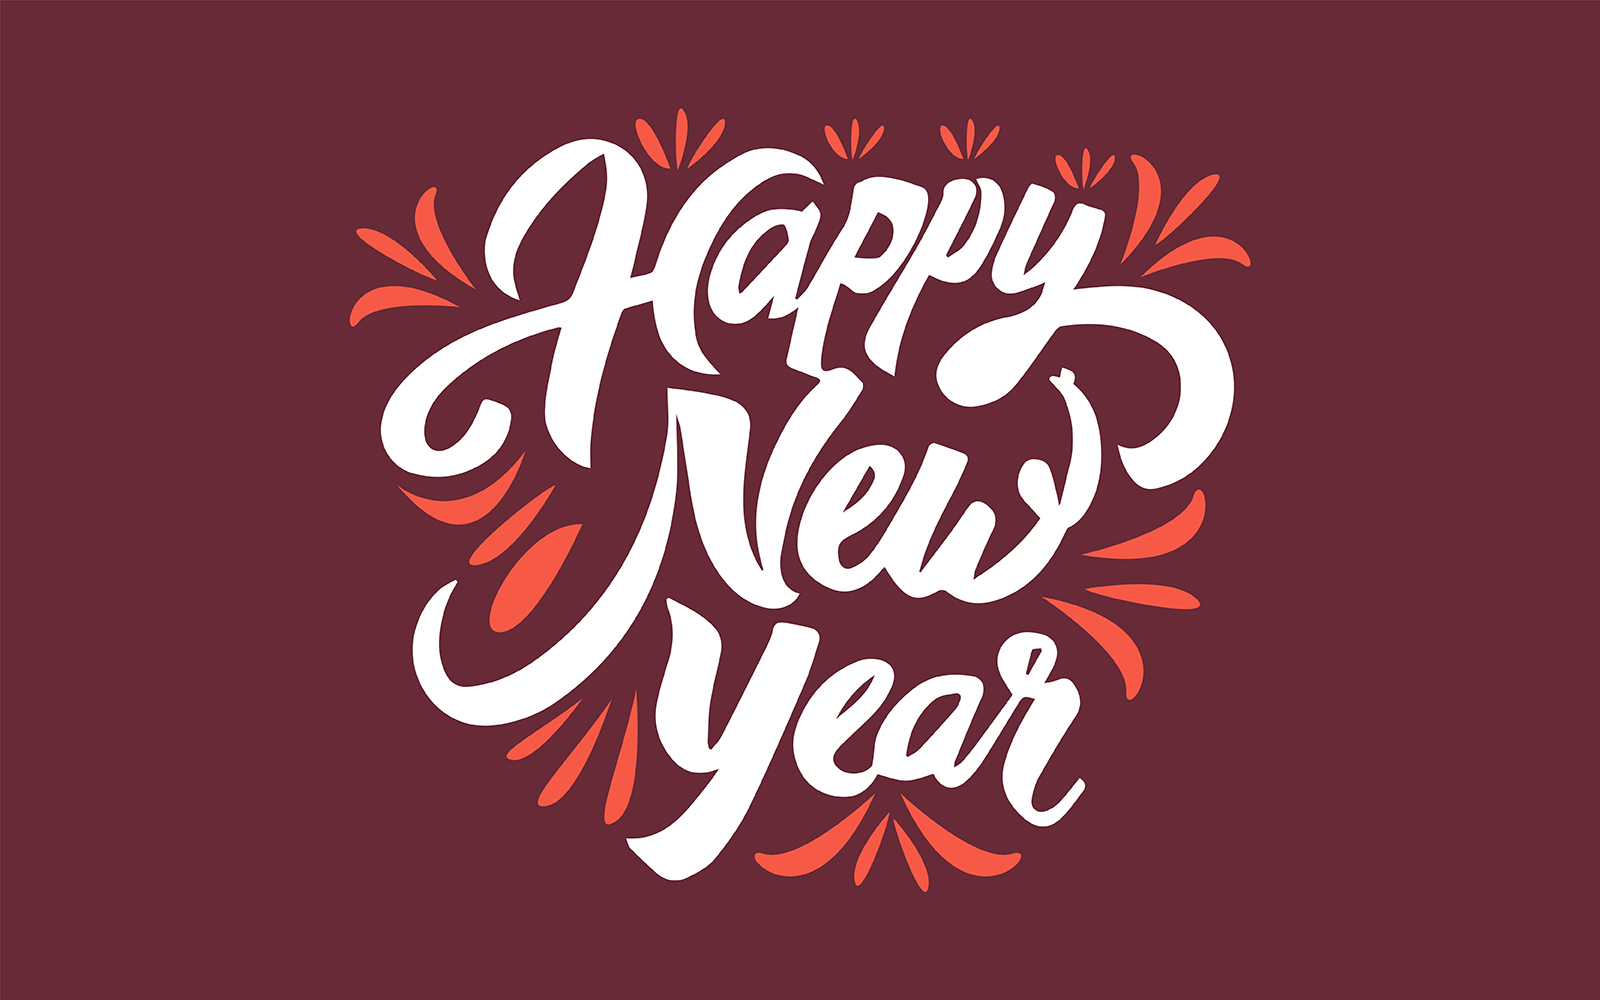 Happy New Year Vector Design with isolated design